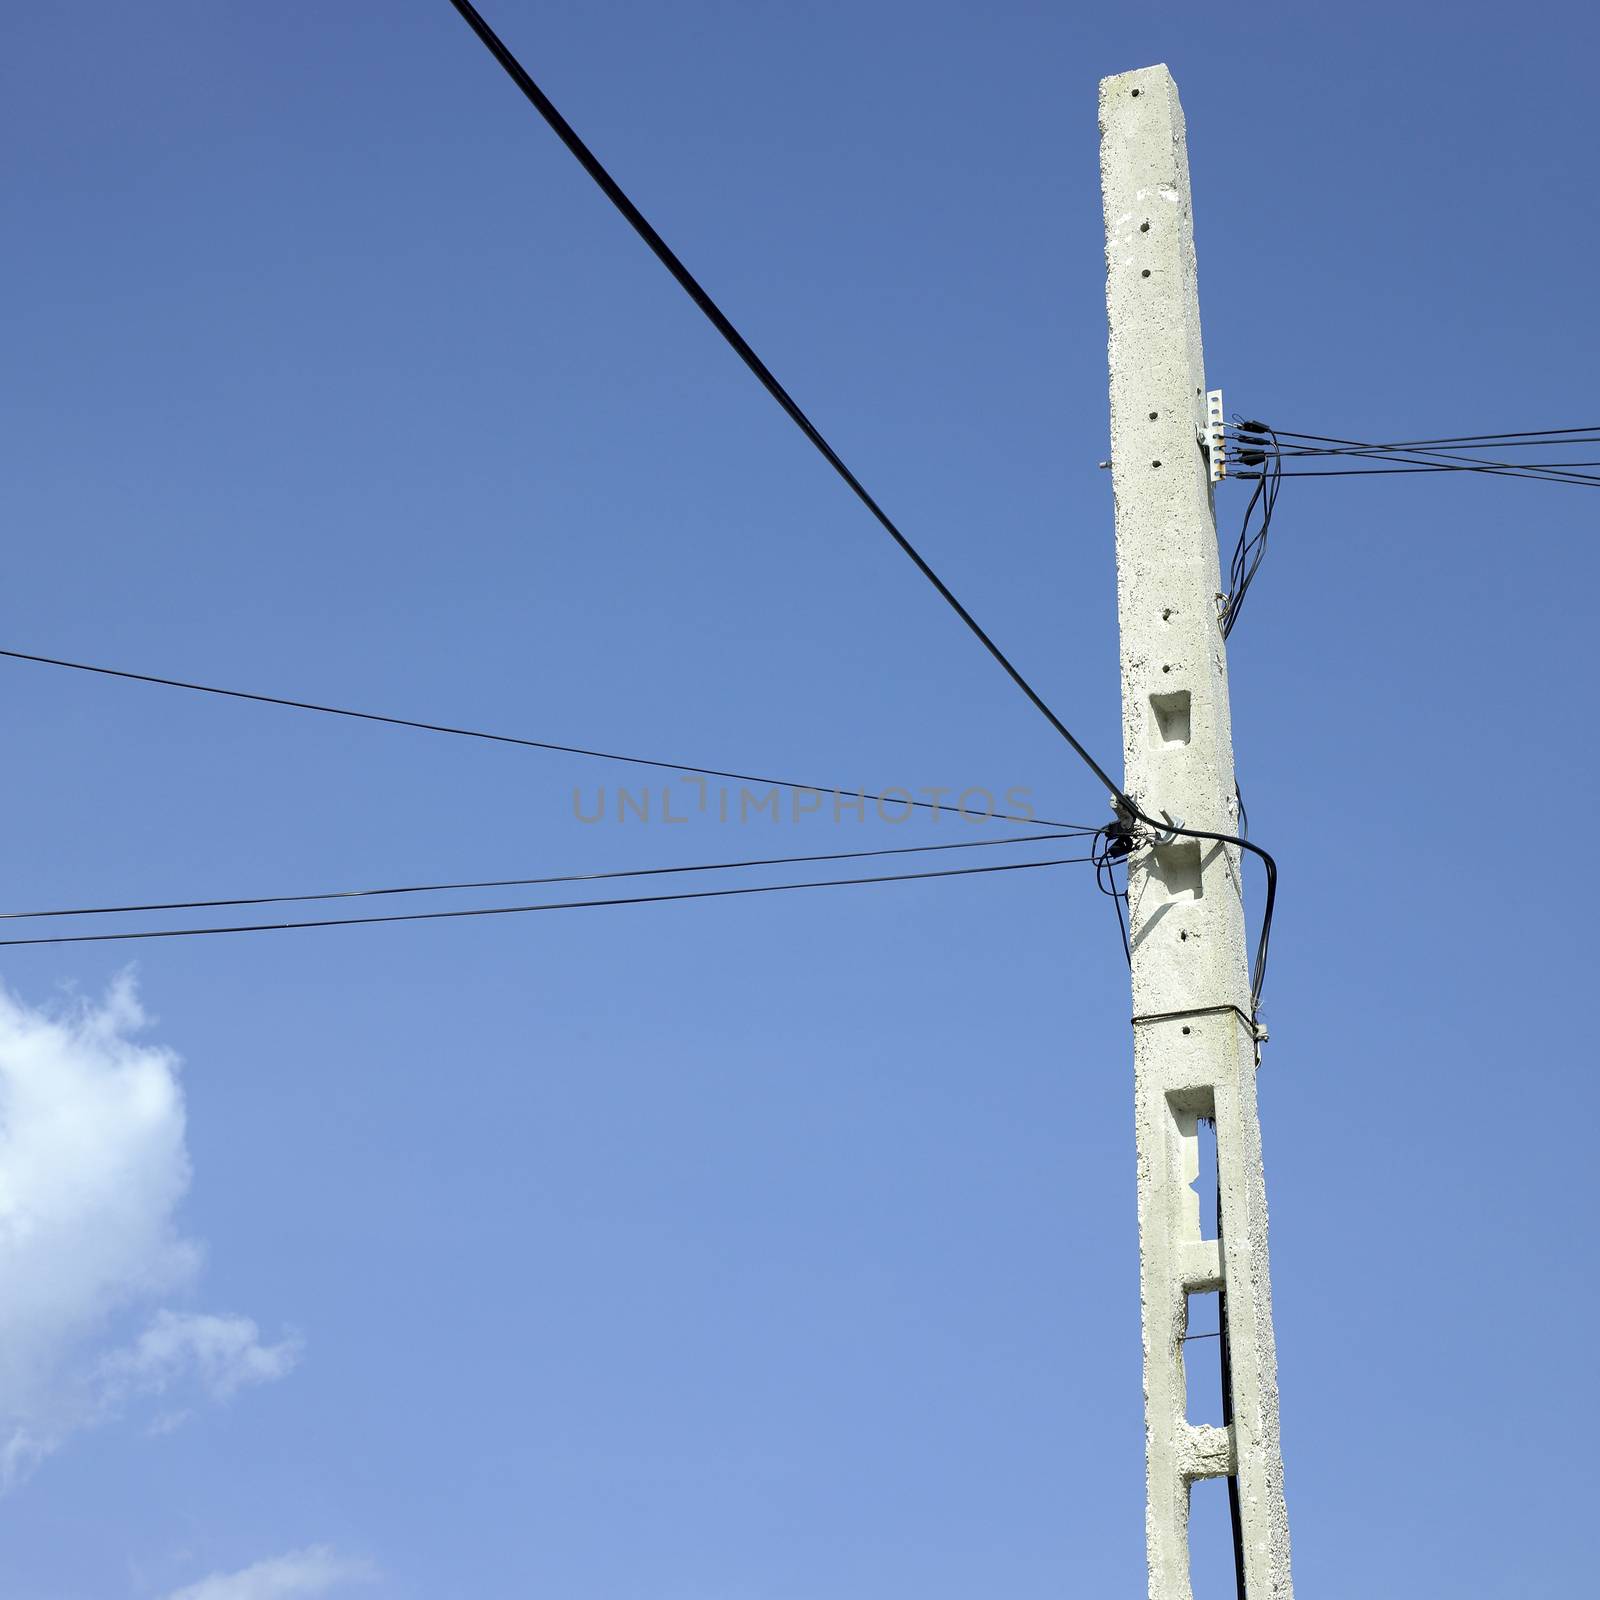 Concrete telephone pole with electrical wires against a blue sky